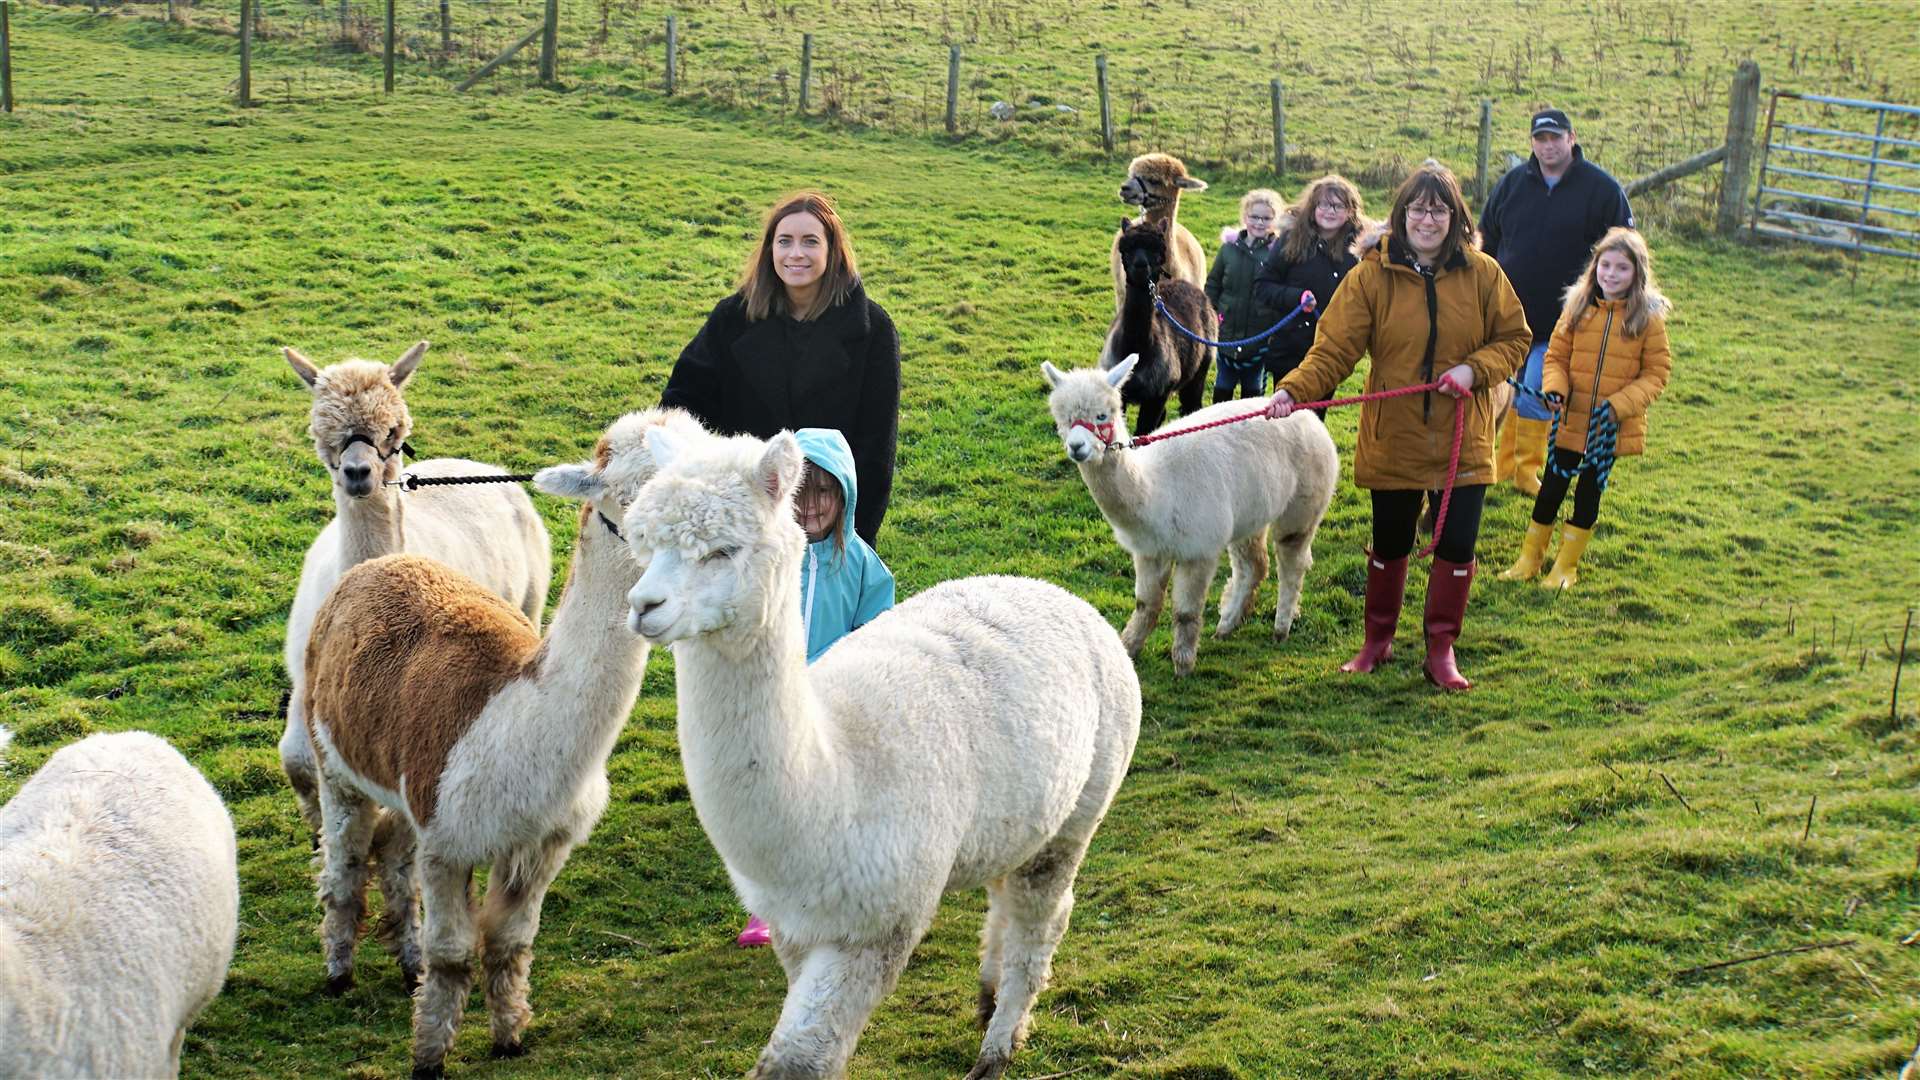 It's a beautiful morning and the visitors stop with their alpacas for a quick portrait shot. Pictures: DGS